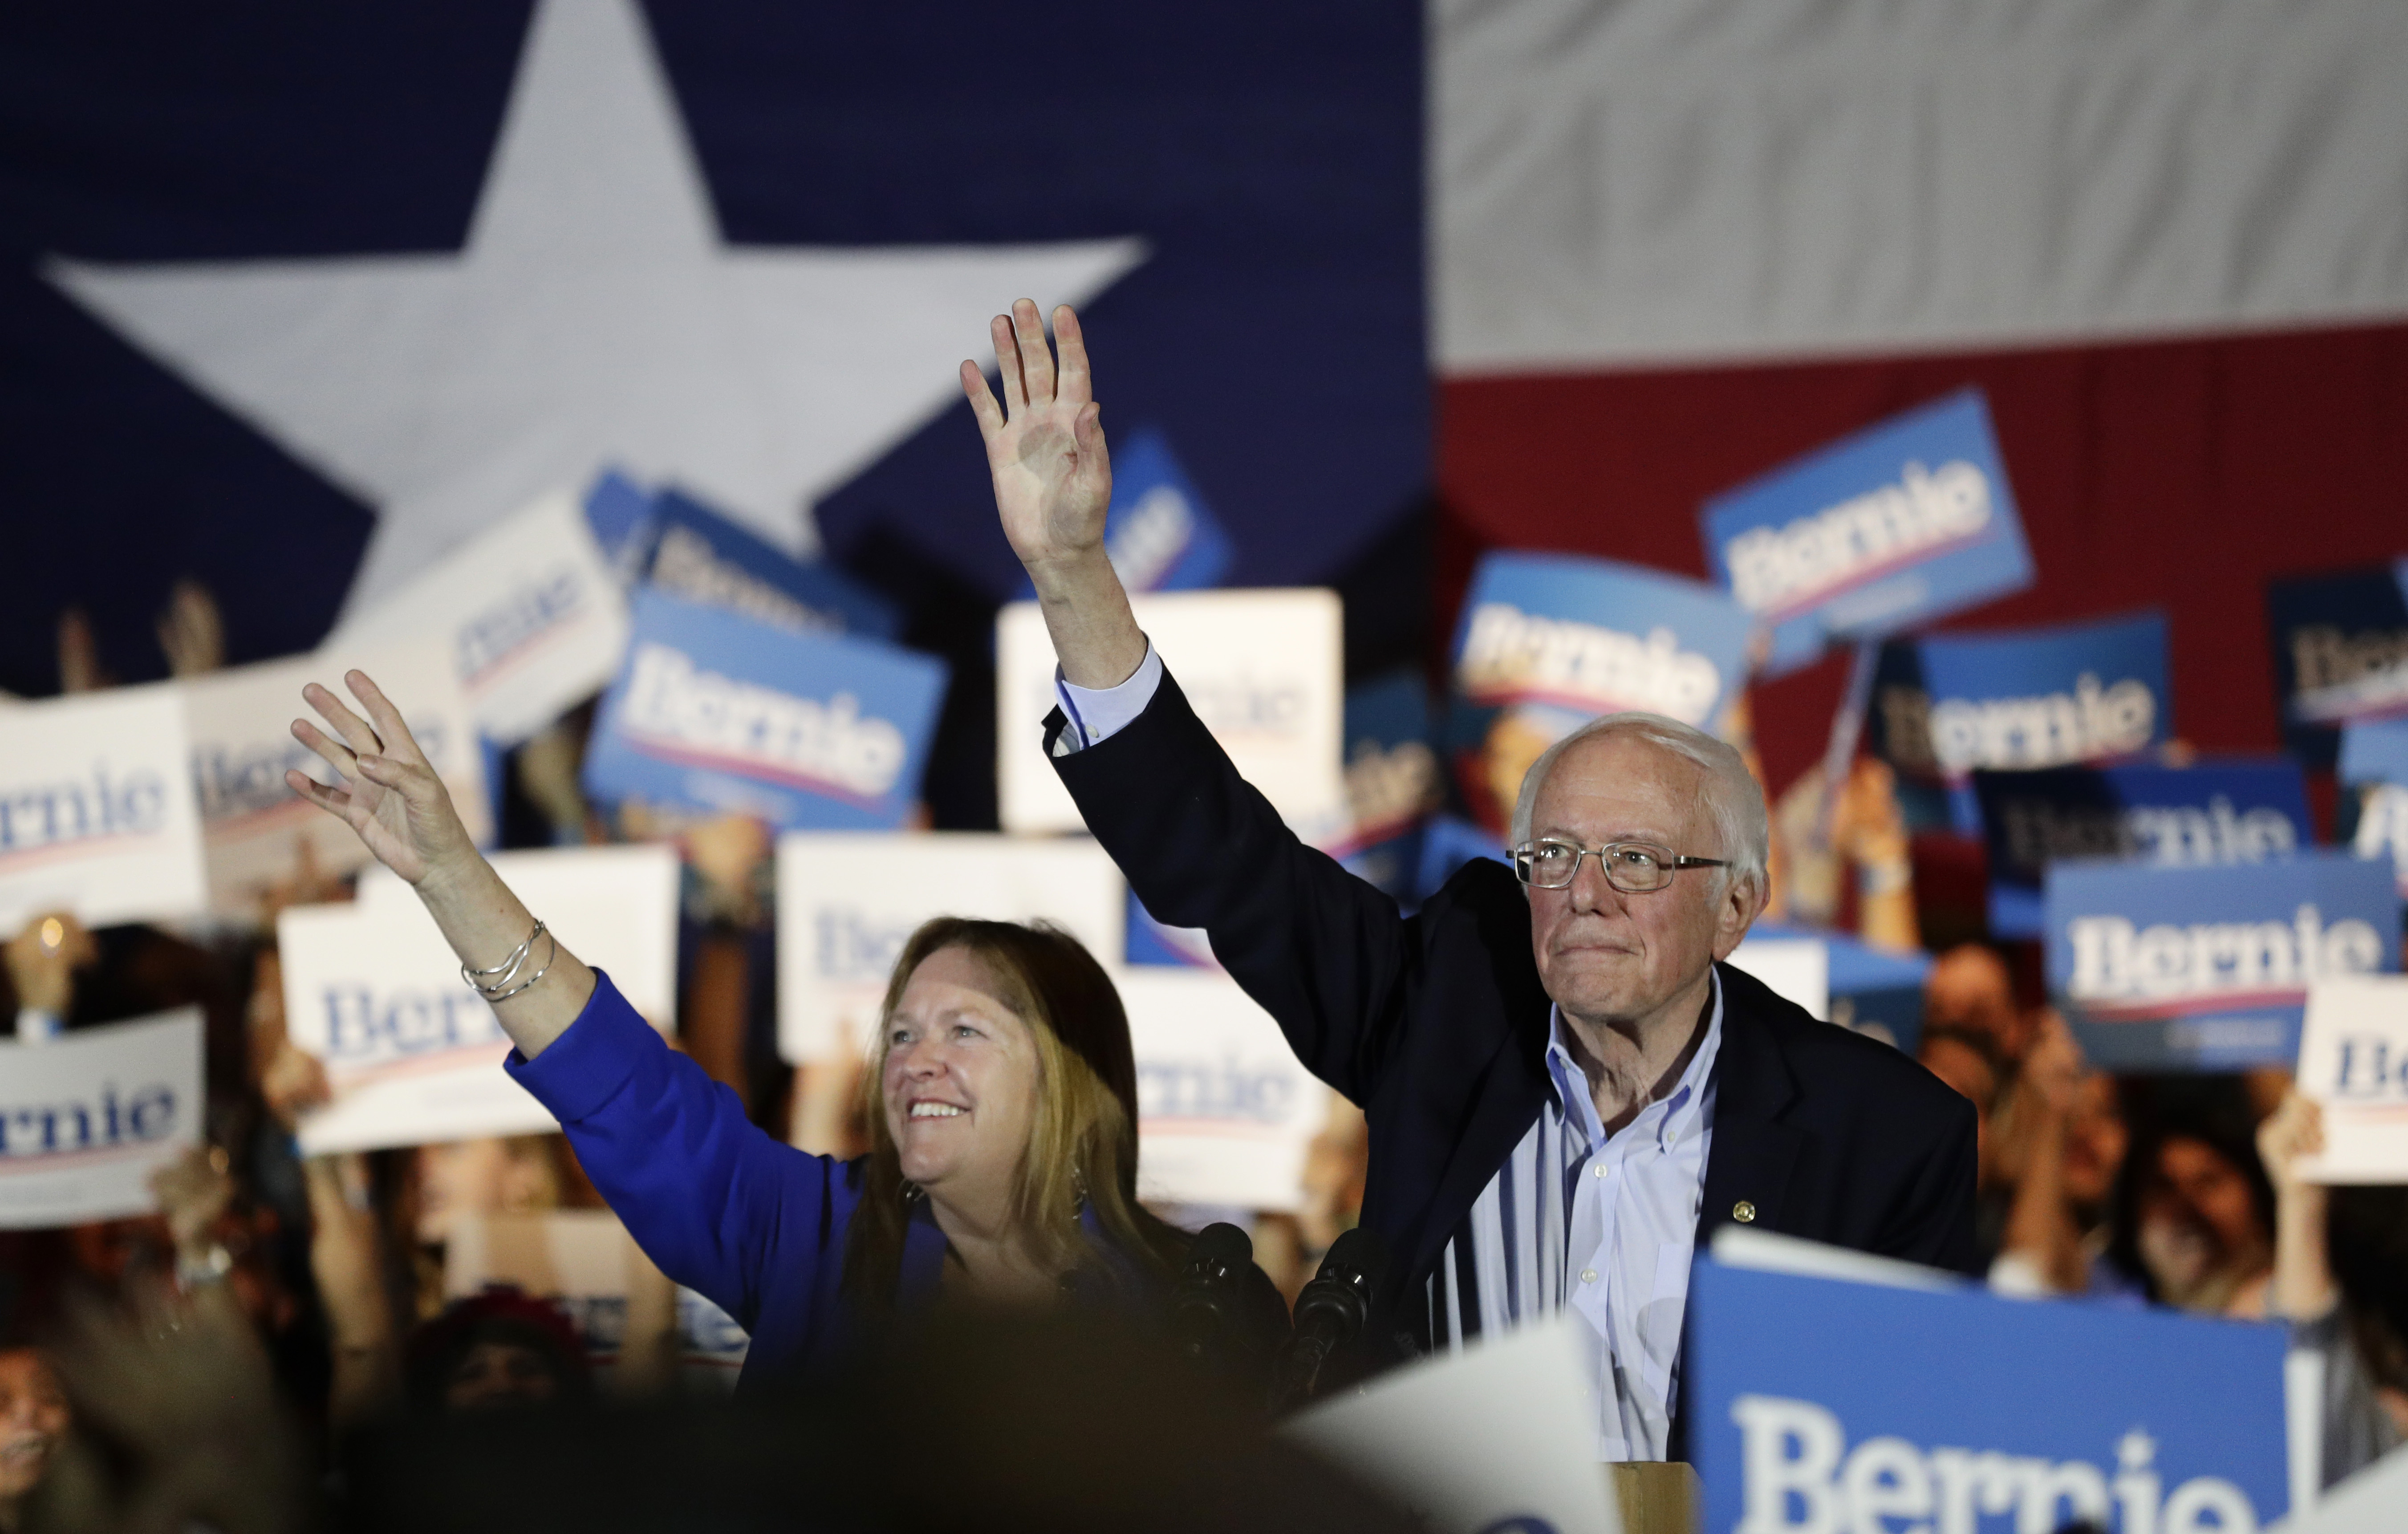 Democratic presidential candidate Sen. Bernie Sanders, I-Vt., right, with his wife Jane, attends a campaign event in San Antonio, Saturday, Feb. 22, 2020. (AP Photo/Eric Gay)